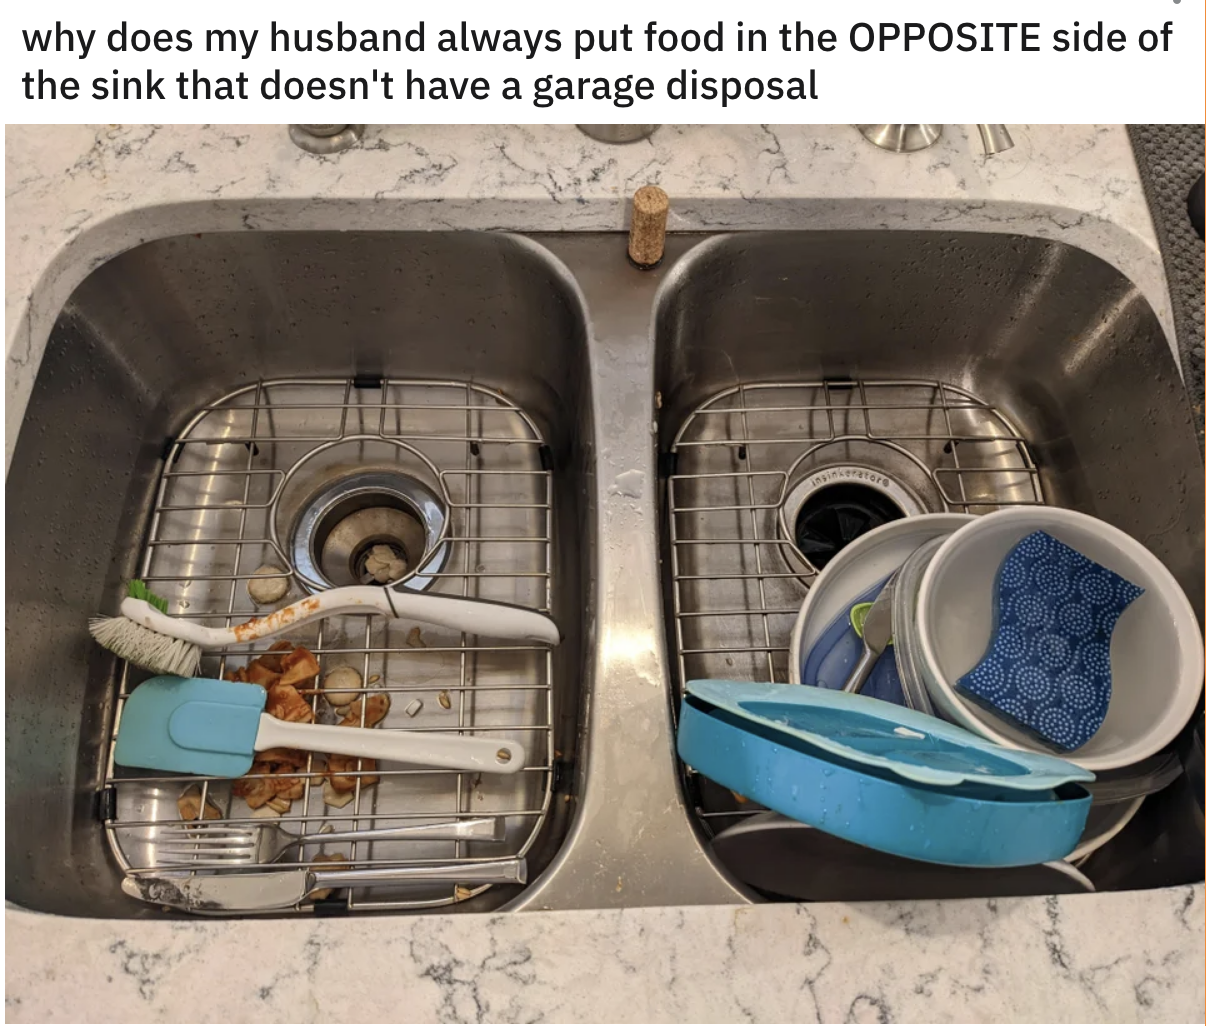 The husband has put food into the side of the sink that doesn&#x27;t have a garbage disposal, and text indicates he does this all the time